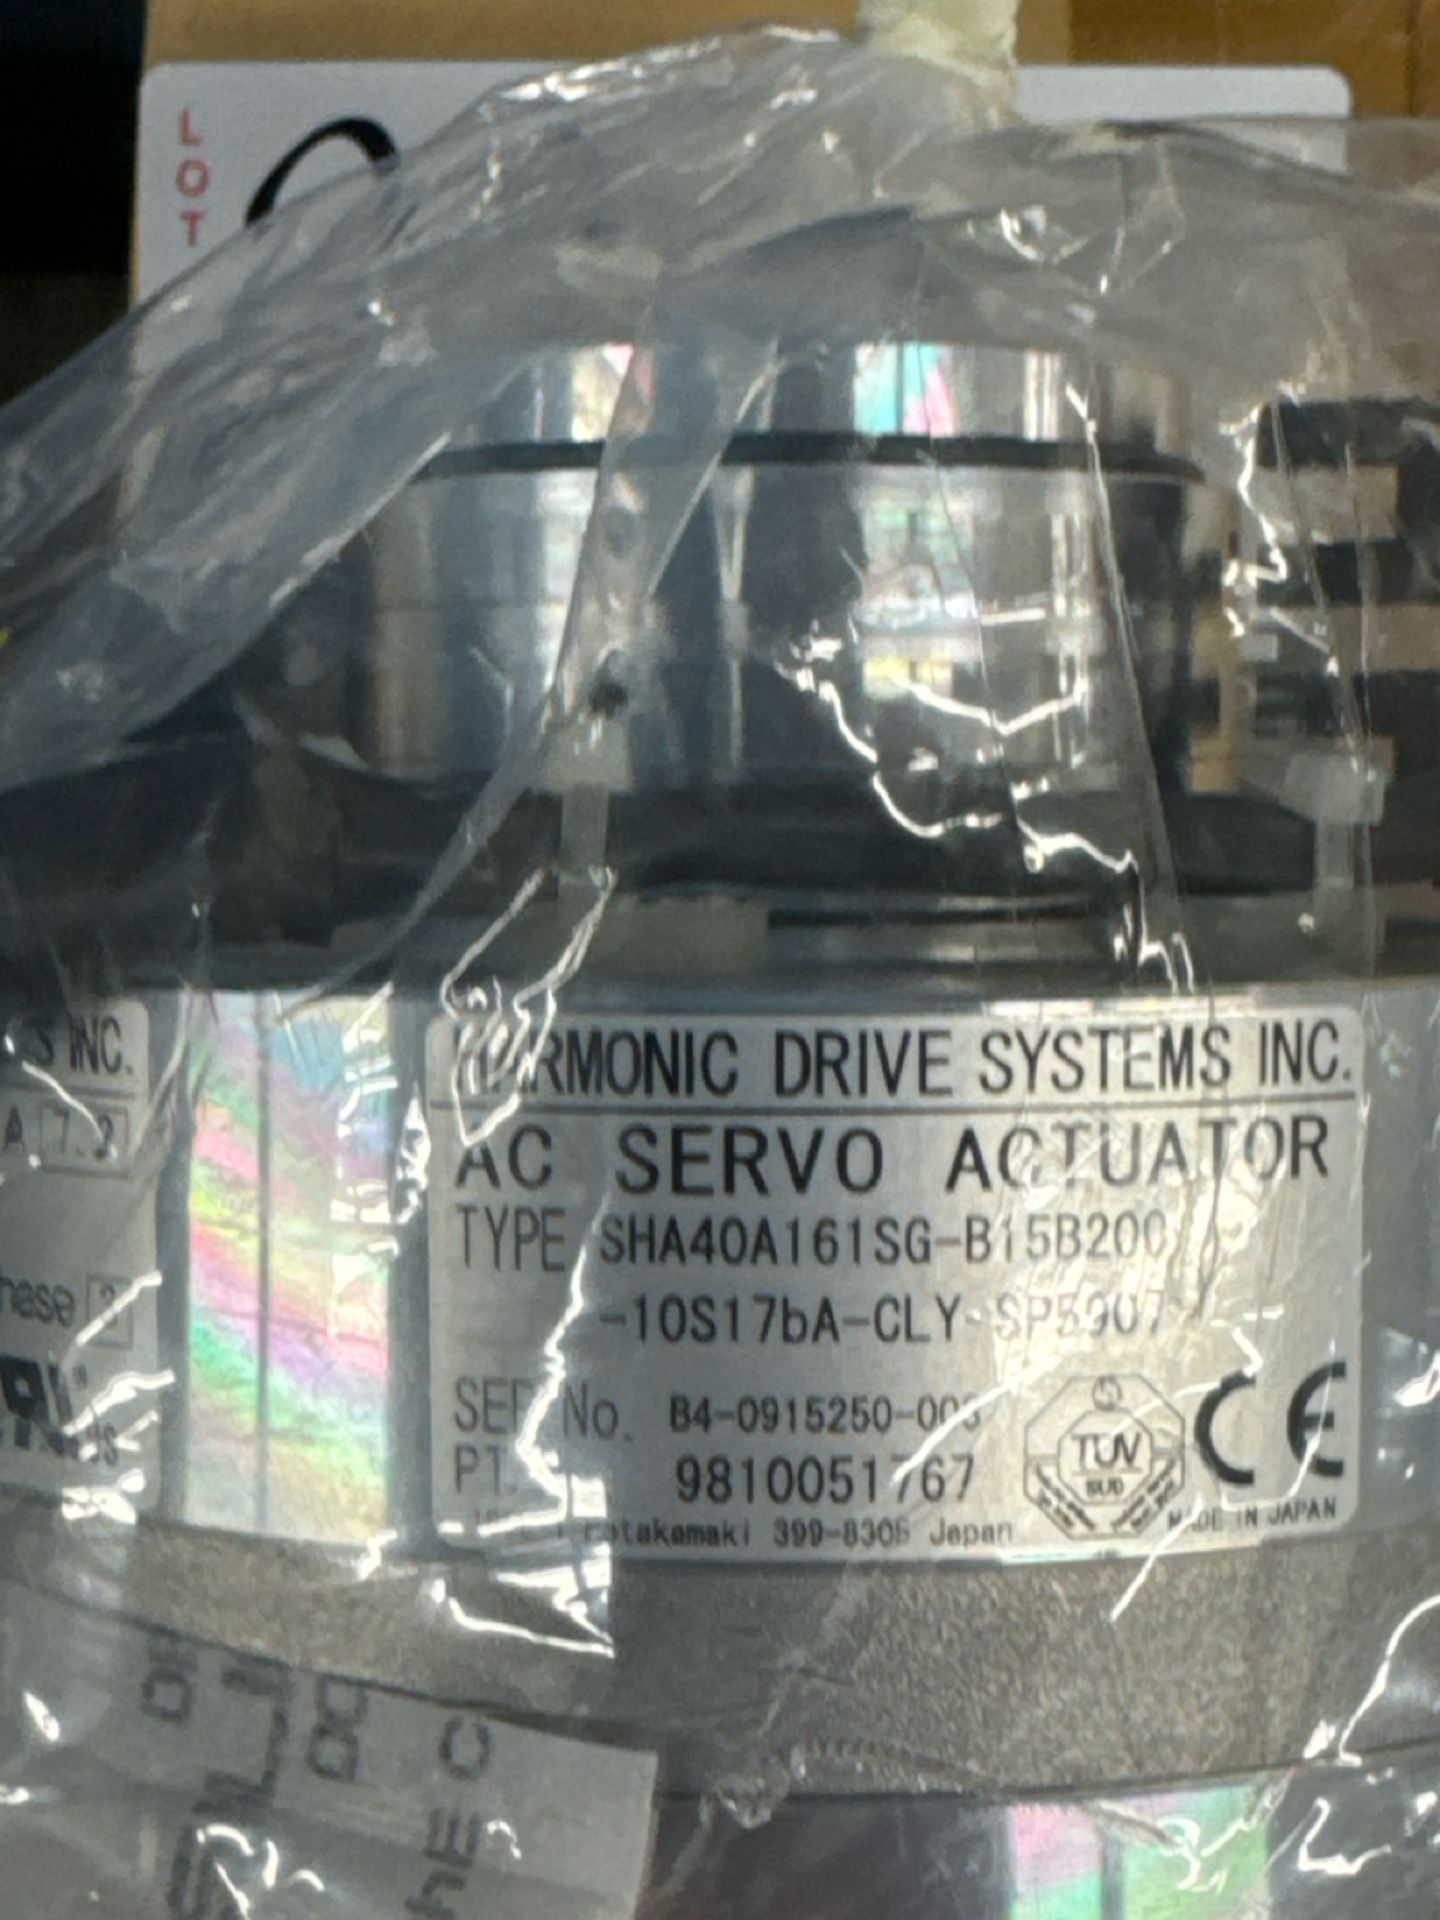 Harmond Drive System Actuator - Image 3 of 5